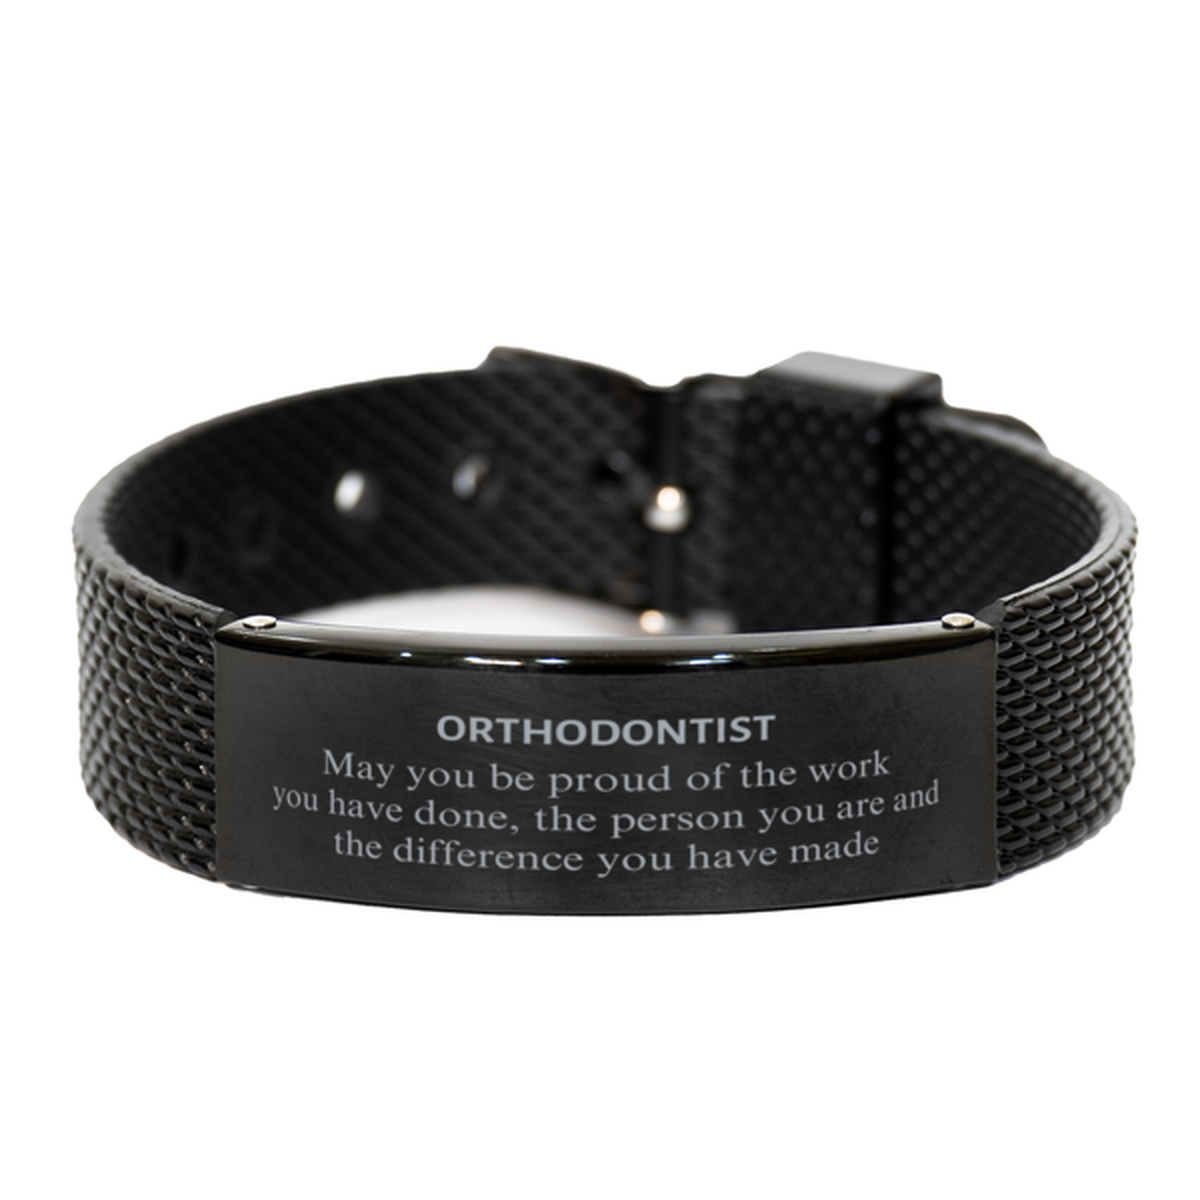 Orthodontist May you be proud of the work you have done, Retirement Orthodontist Black Shark Mesh Bracelet for Colleague Appreciation Gifts Amazing for Orthodontist